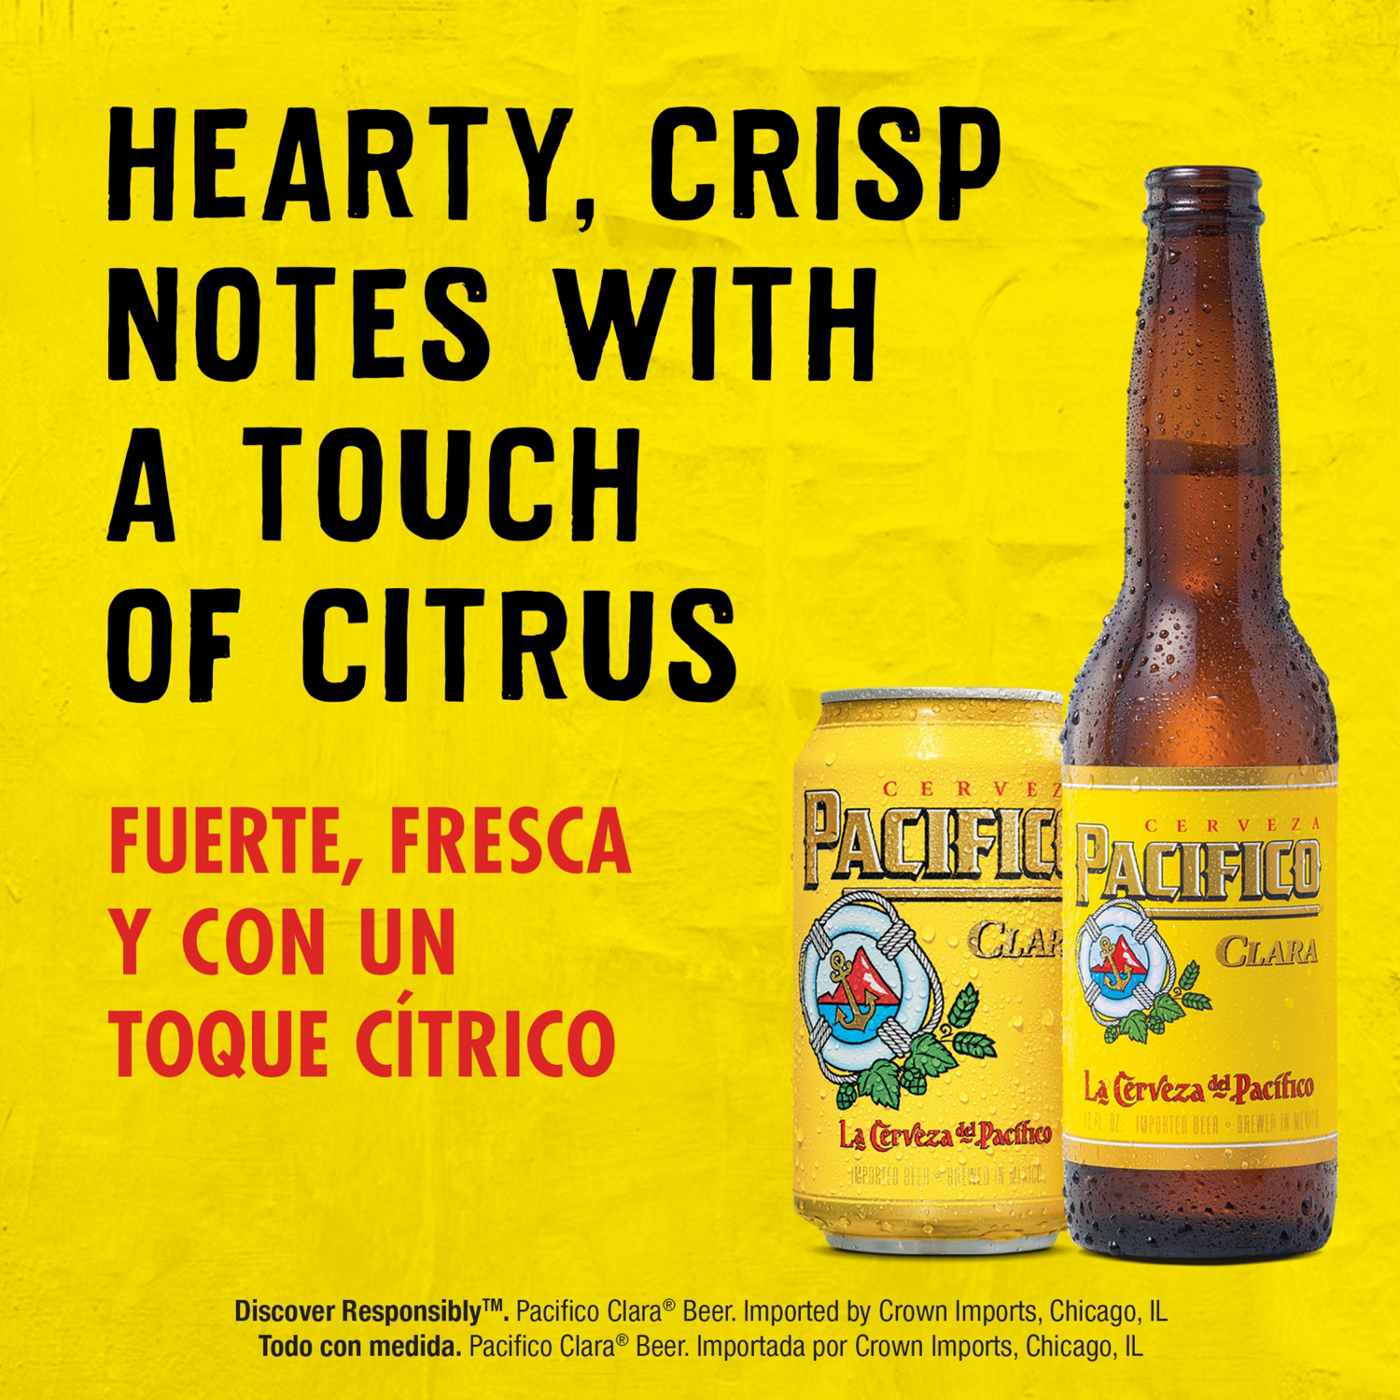 Pacifico Clara Mexican Lager Import Beer 12 oz Bottles, 12 pk; image 8 of 10